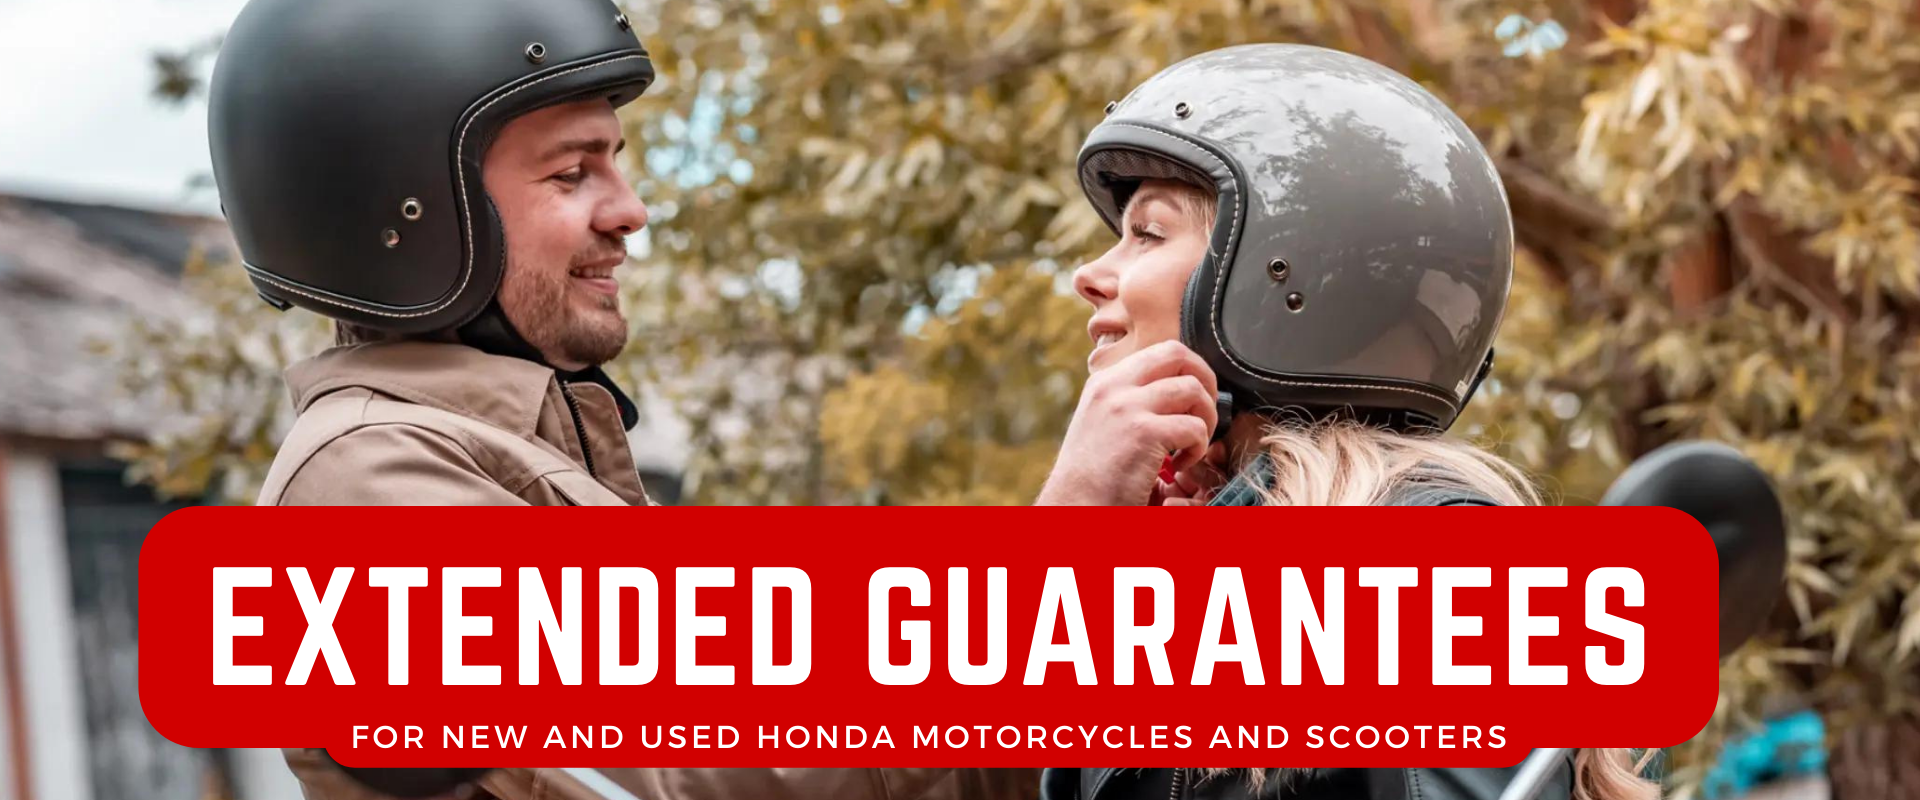 Honda Extended Guarantee For Motorcycles